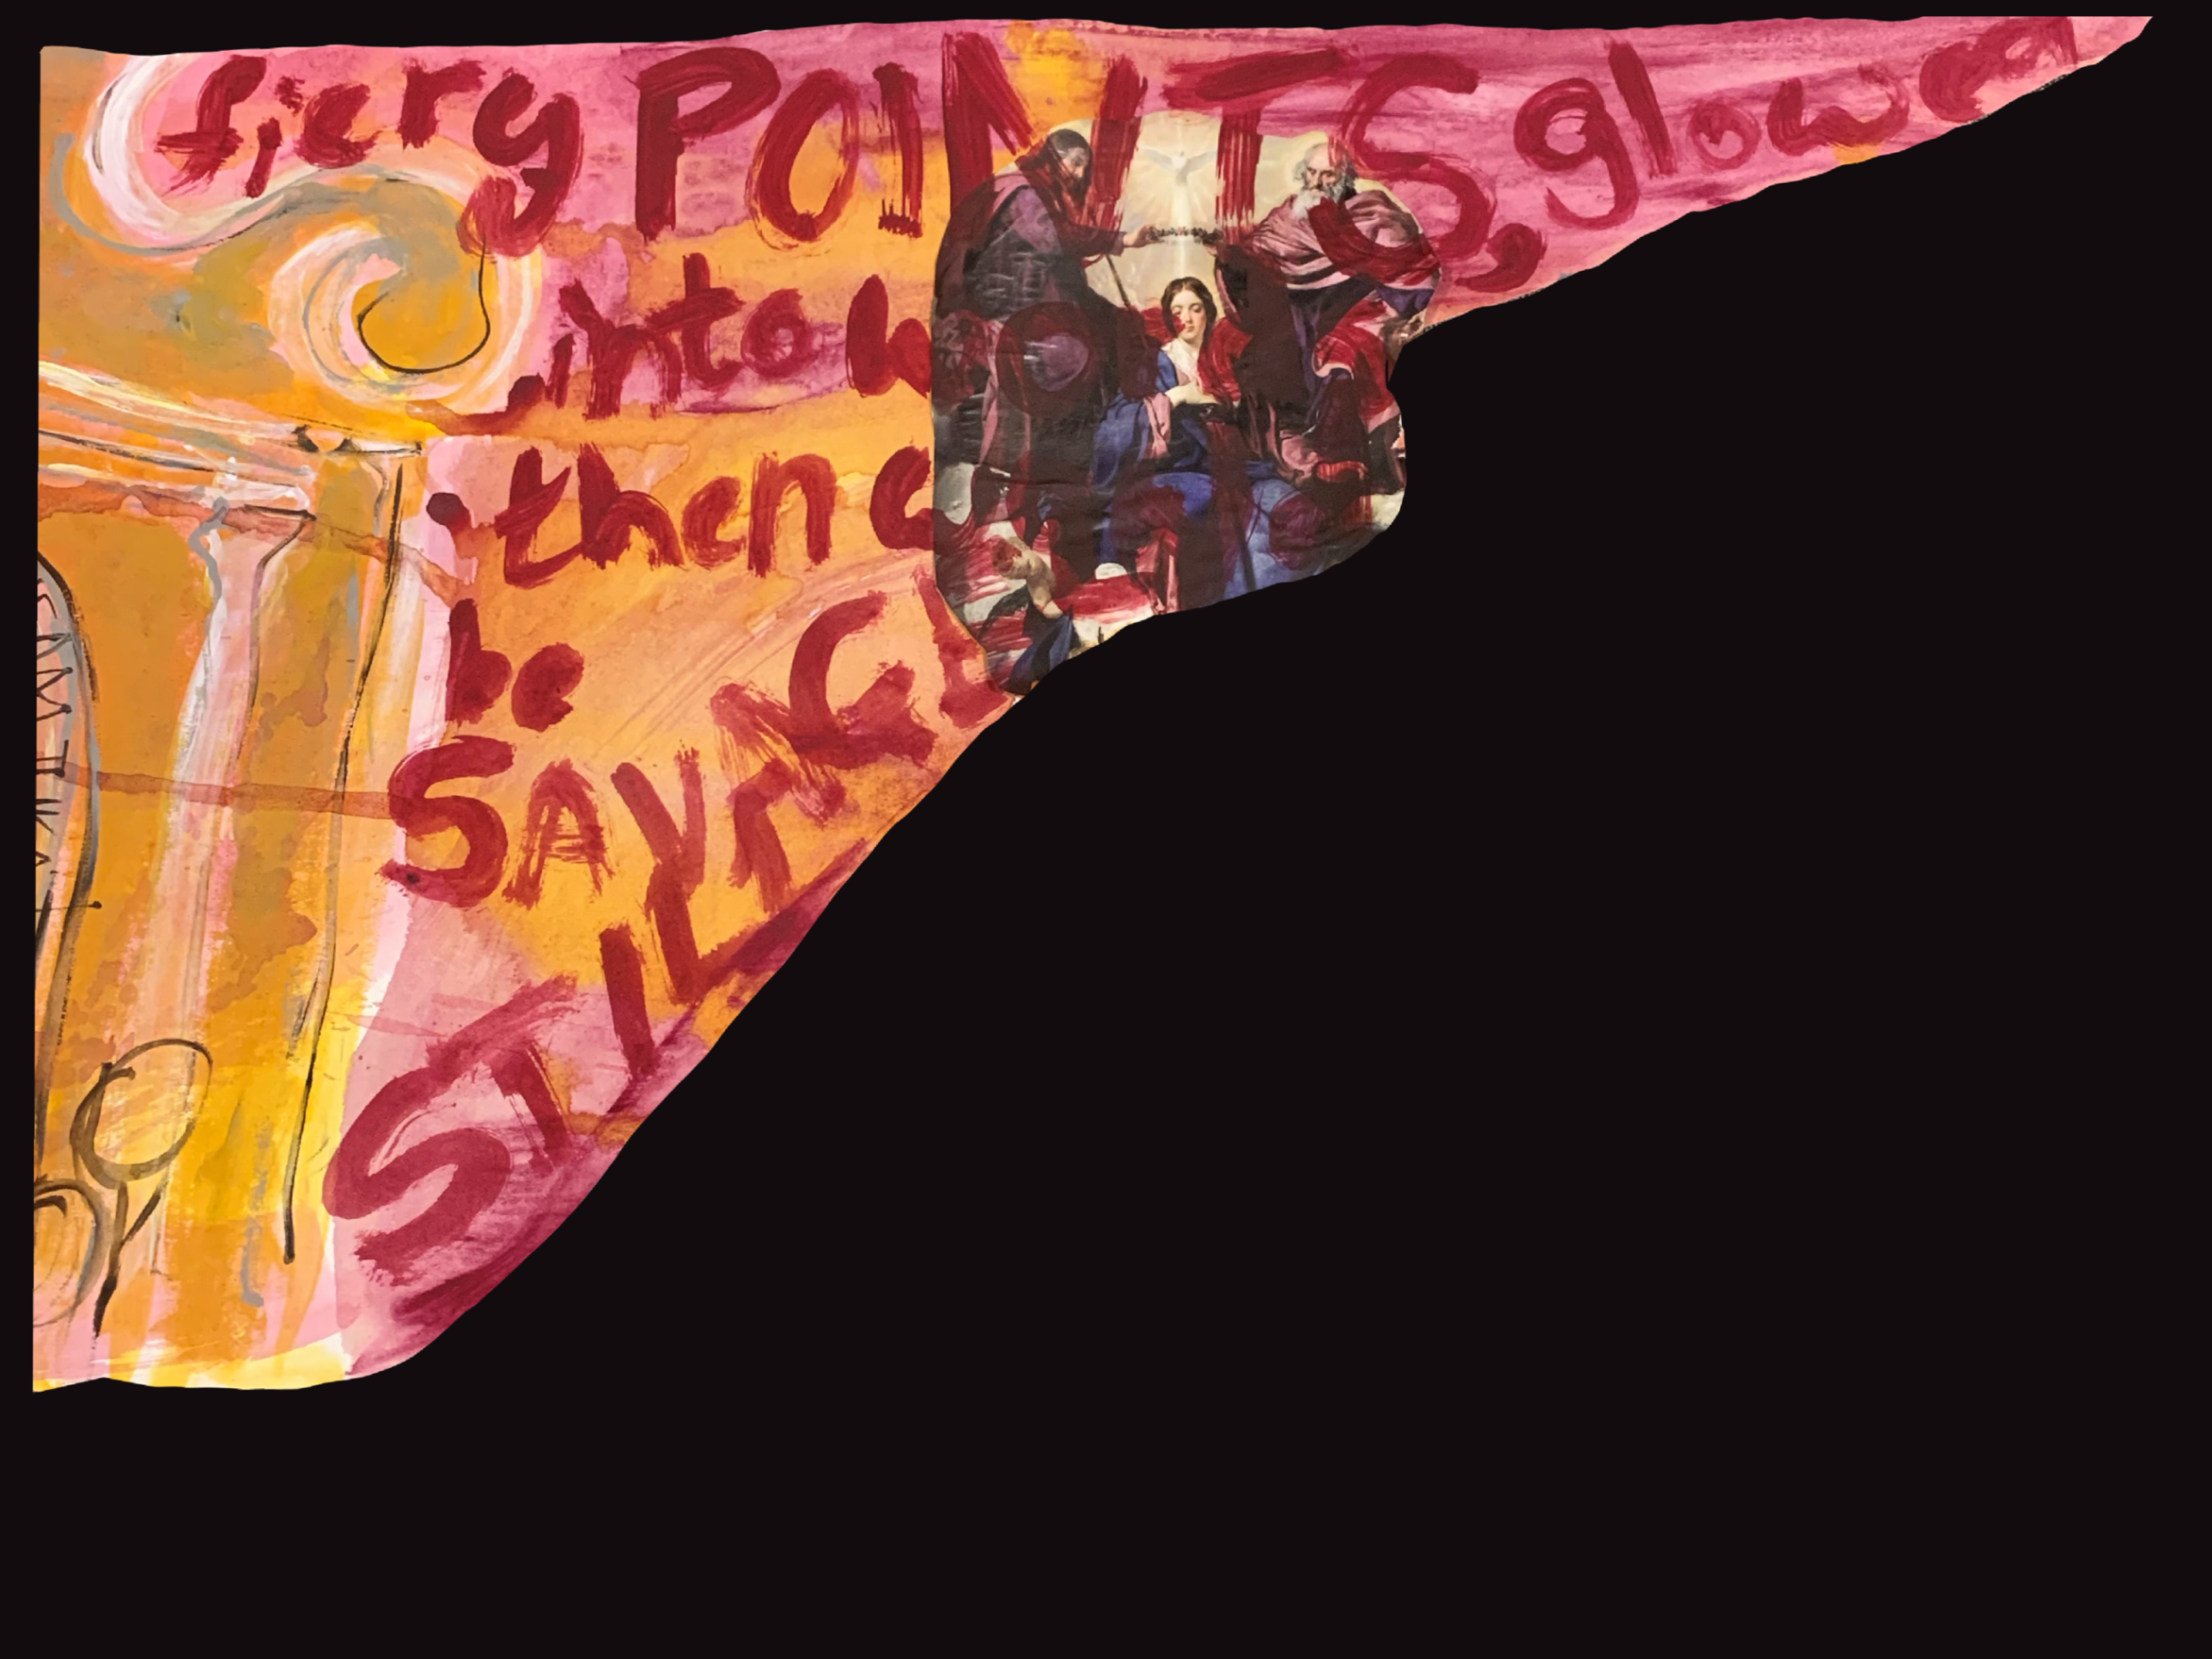 Black rectangular background, triangular figure within of pink and yellow tones. Inside, there is a Renaissance religious painting of Virgin Mary and the Holy Spirit on top. Throughout the triangular figure, there is a red text that says "Fiery points, glowed into words, then would be savagely still" (quote from T. S. Eliot's The Waste Land)